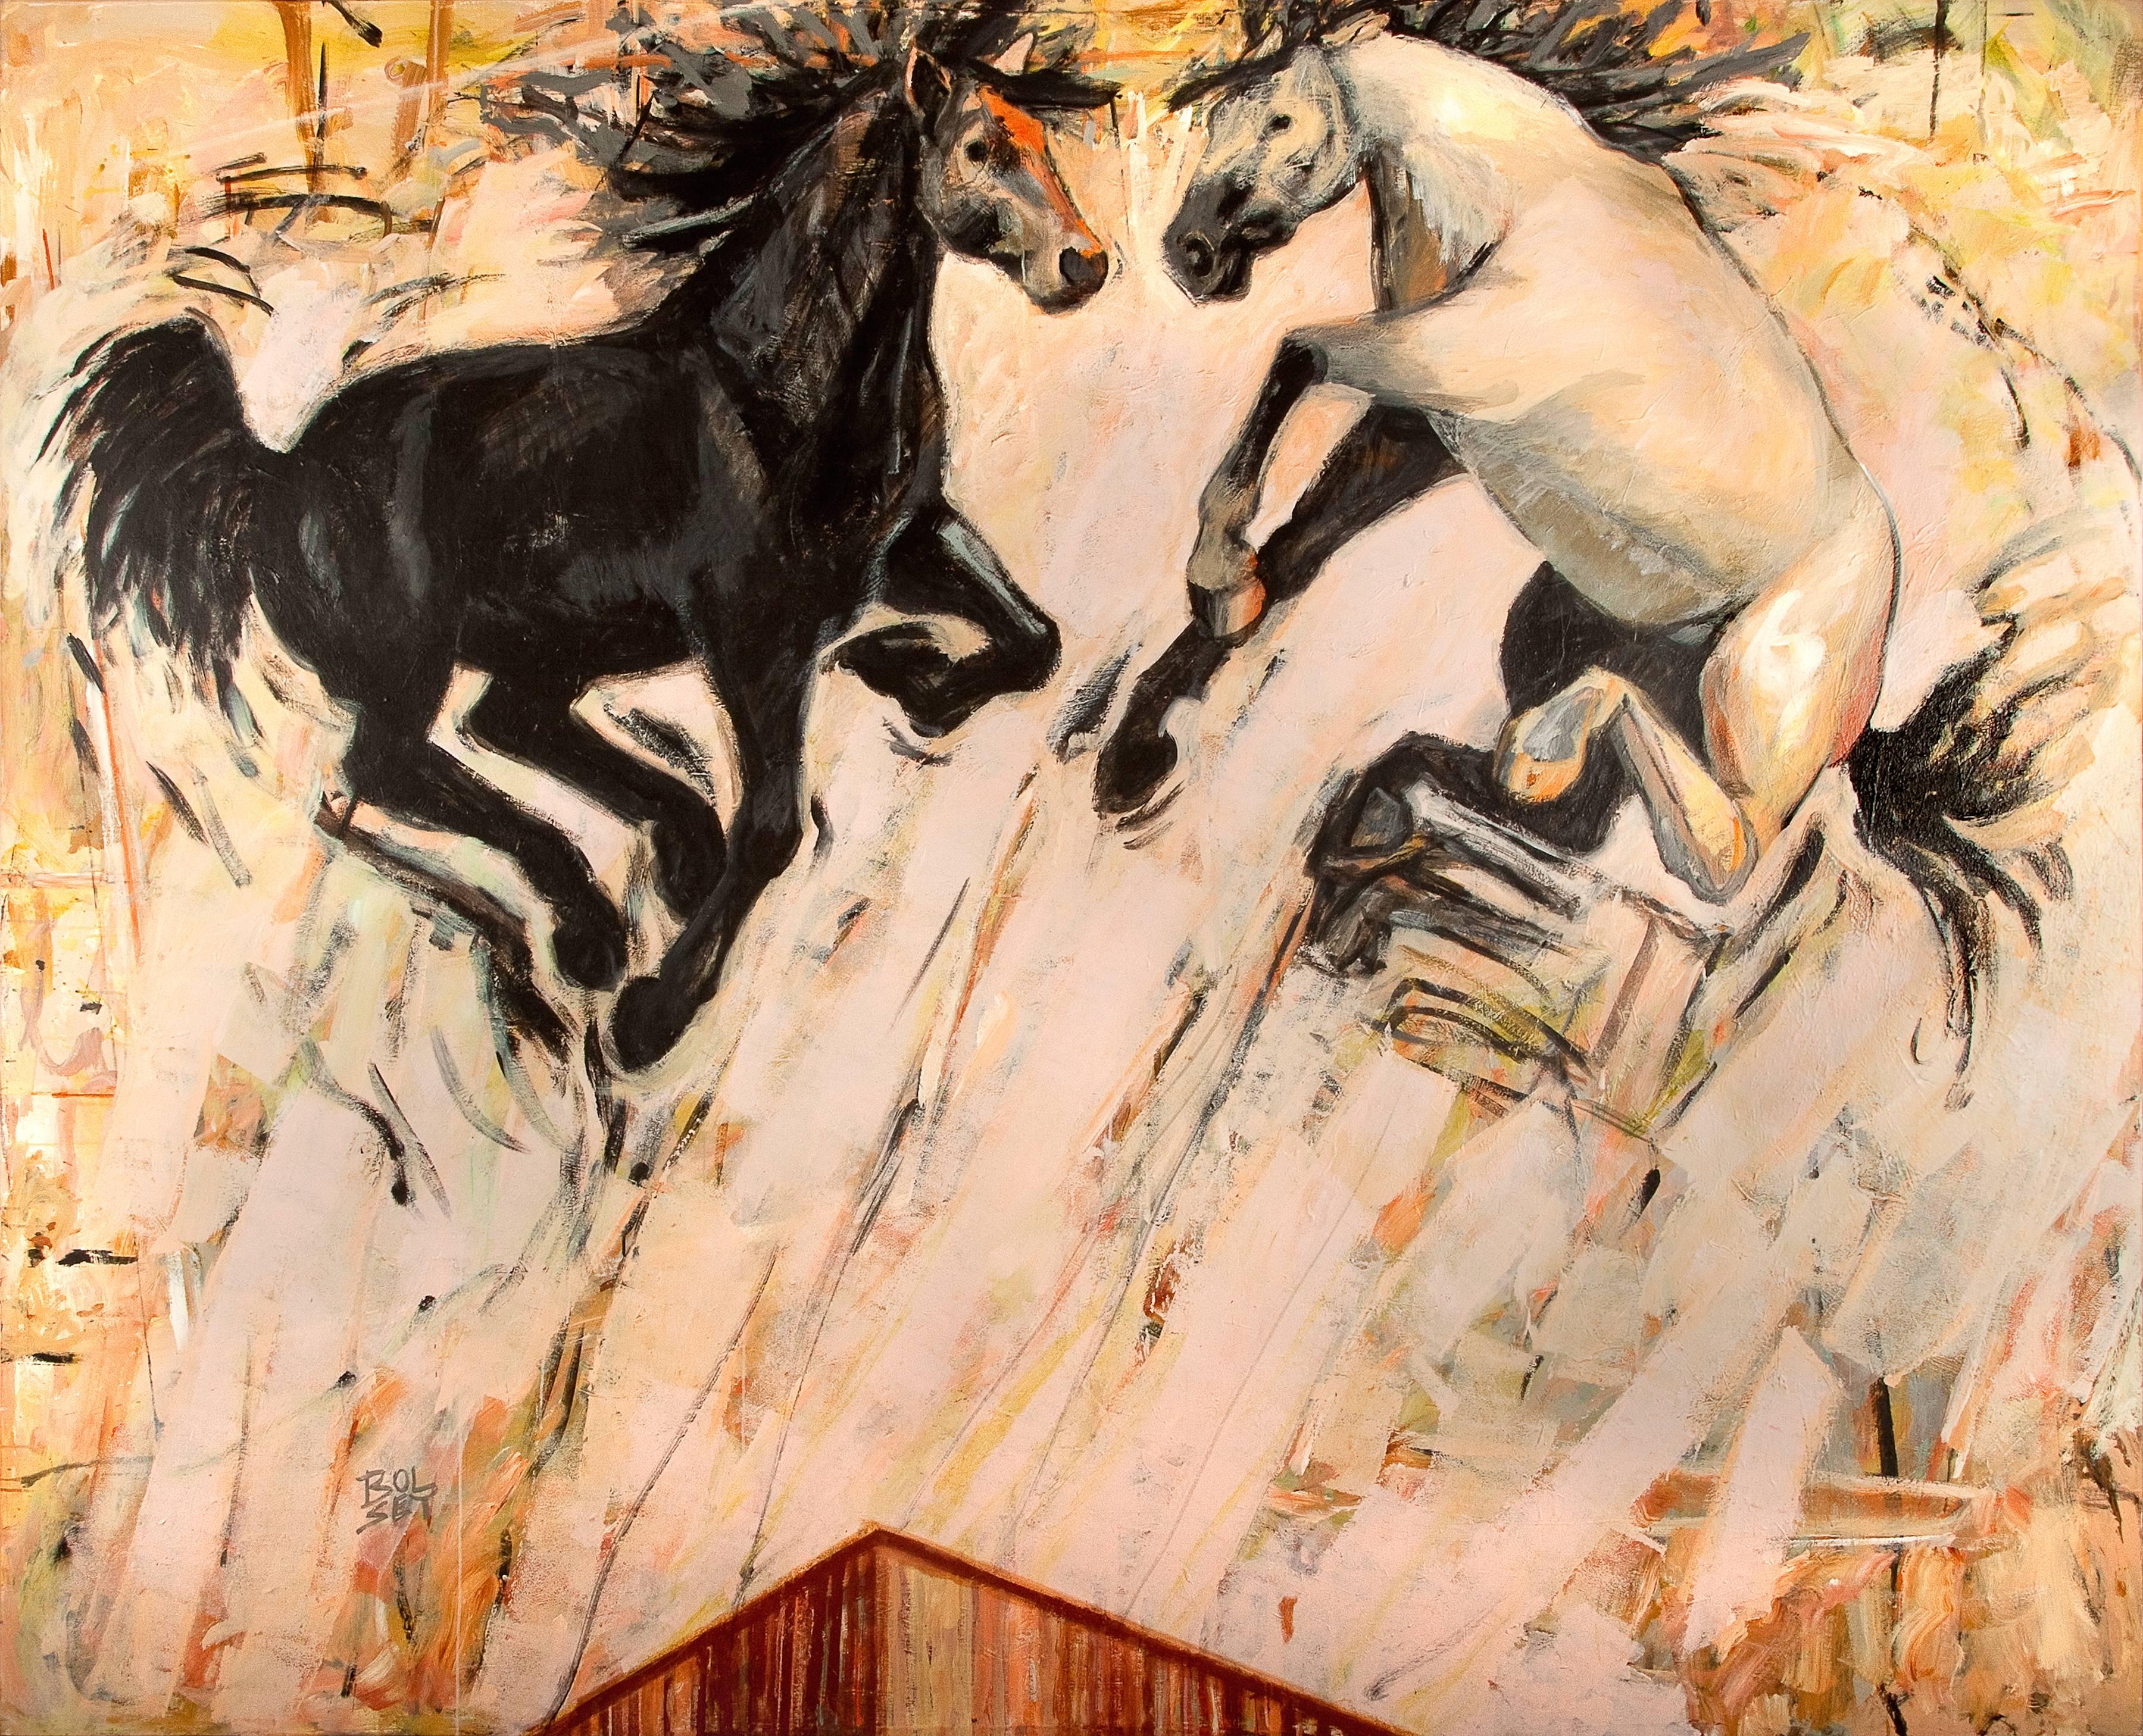 "Two Horse High" - Black and White Horse Painting  - Mixed Media Art by Carole Bolsey